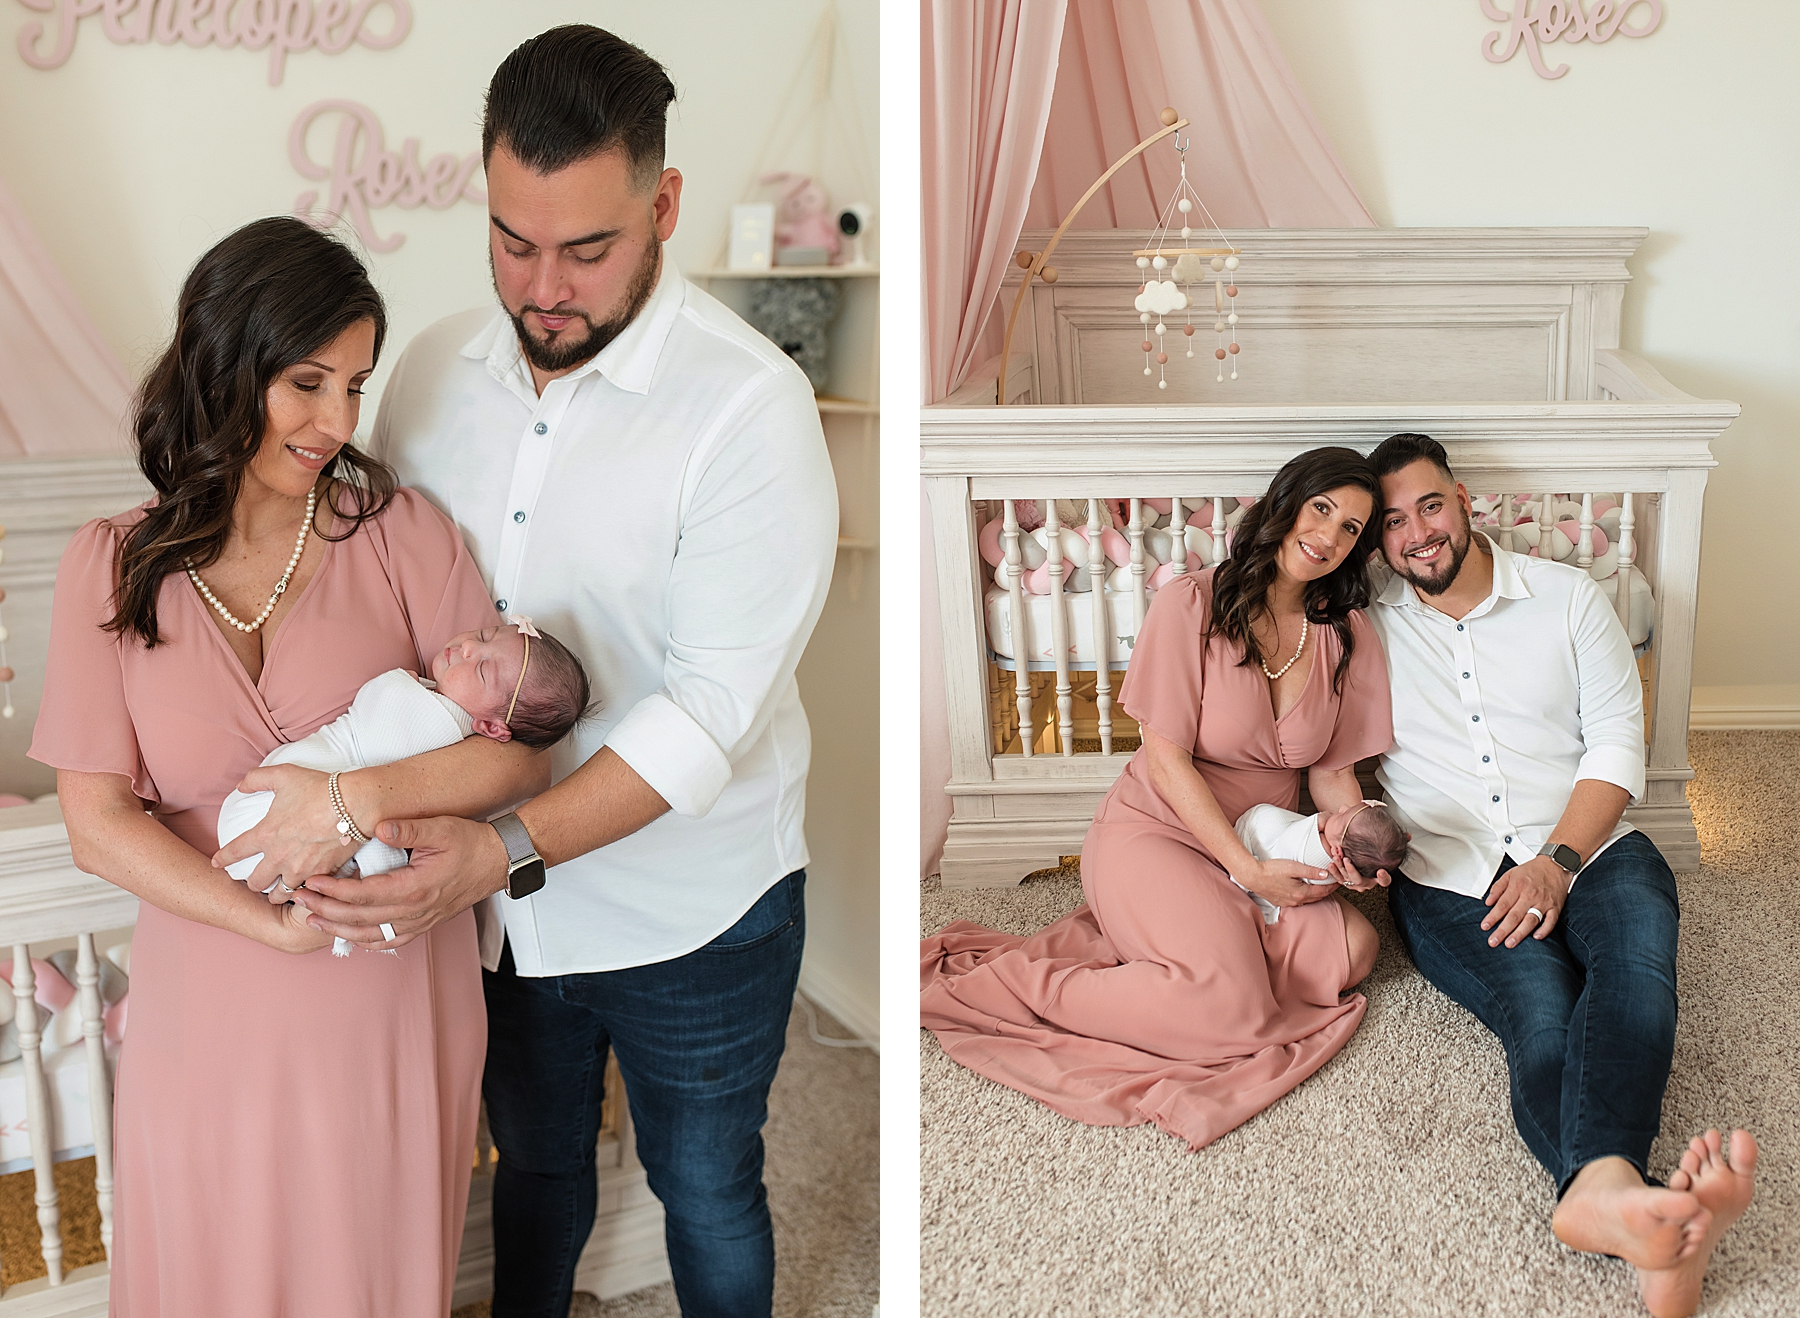 Mom and dad holding newborn baby girl in pink and white nursery | In-Home Newborn Photo Session | Lindsey Dutton Photography | Dallas Area Family Photographer | newborn session, newborn posing ideas, newborn photos, girl nursery inspiration | via lindseyduttonphotography.com